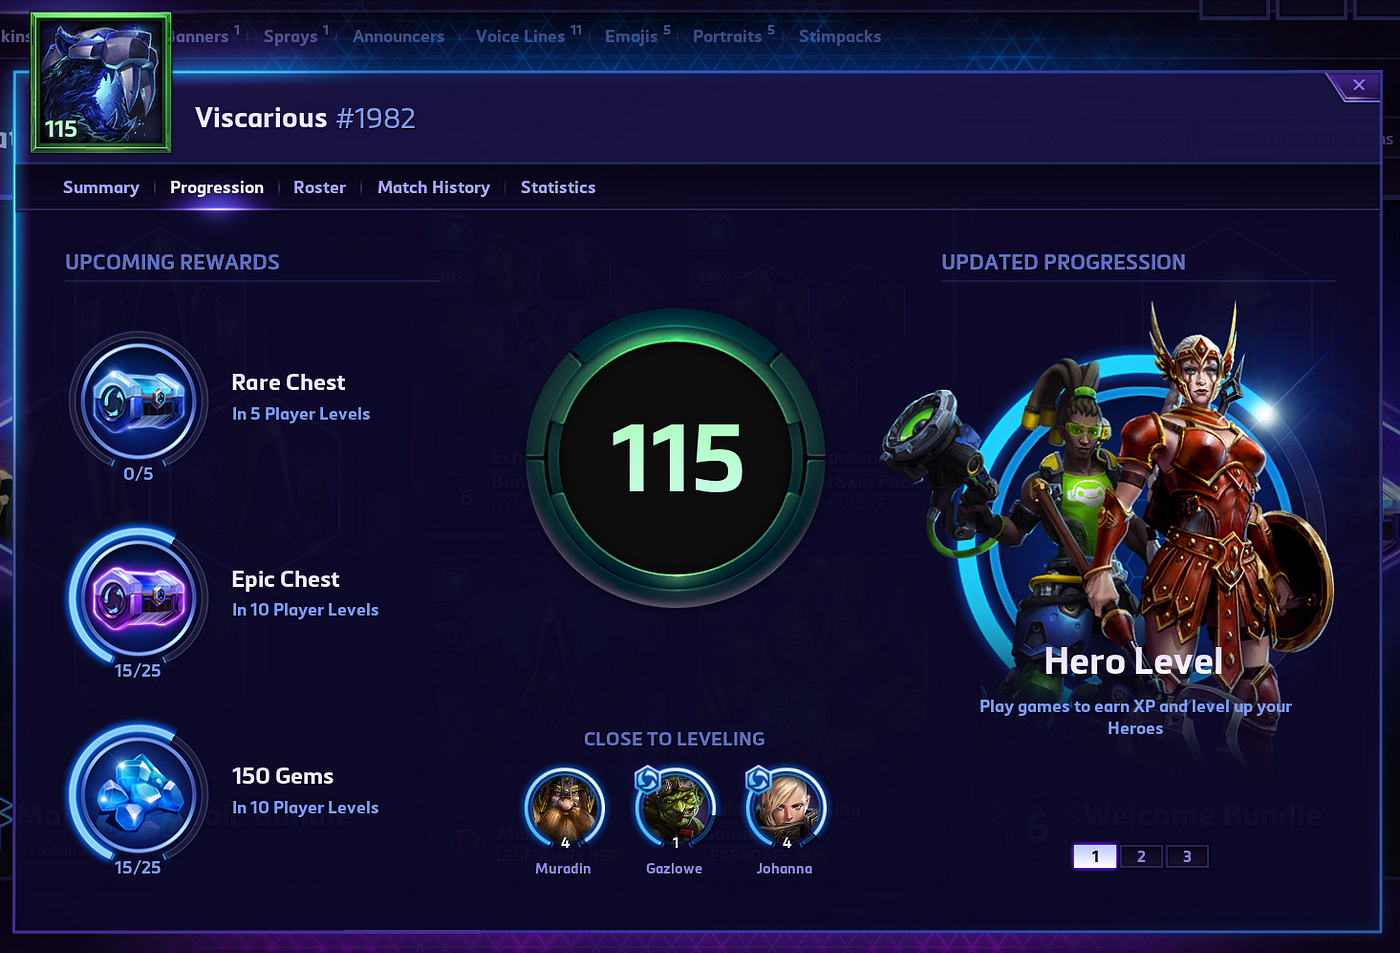 Heroes of the Storm Update: Single Hero Played By Two Players?!